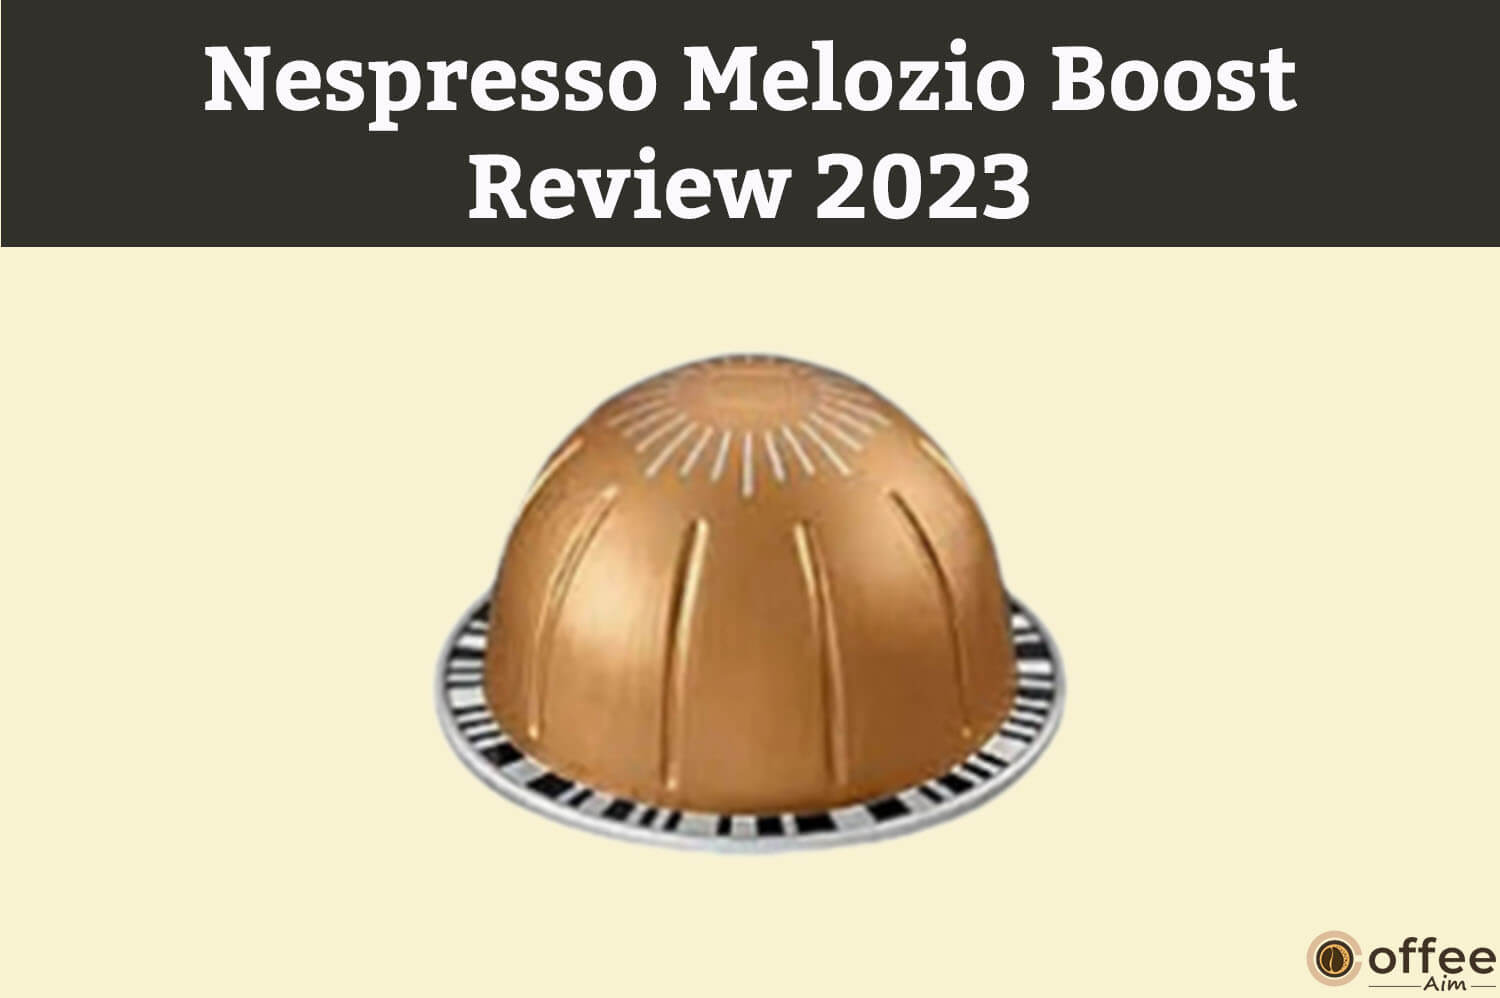 Featured image for the article "Nespresso Melozio Boost Review 2023"